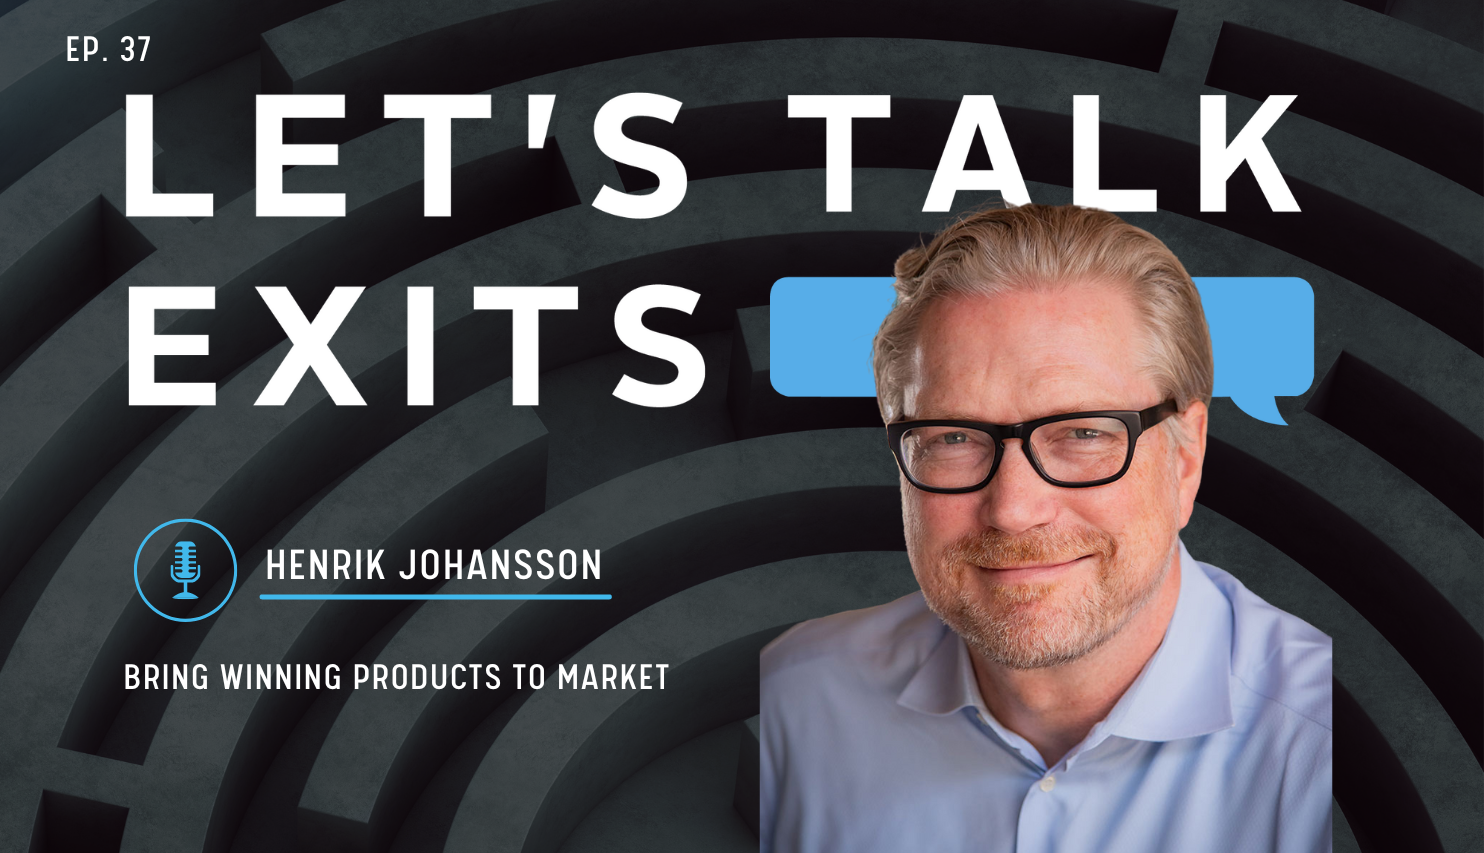 Bring Winning Products to Market with Henrik Johansson